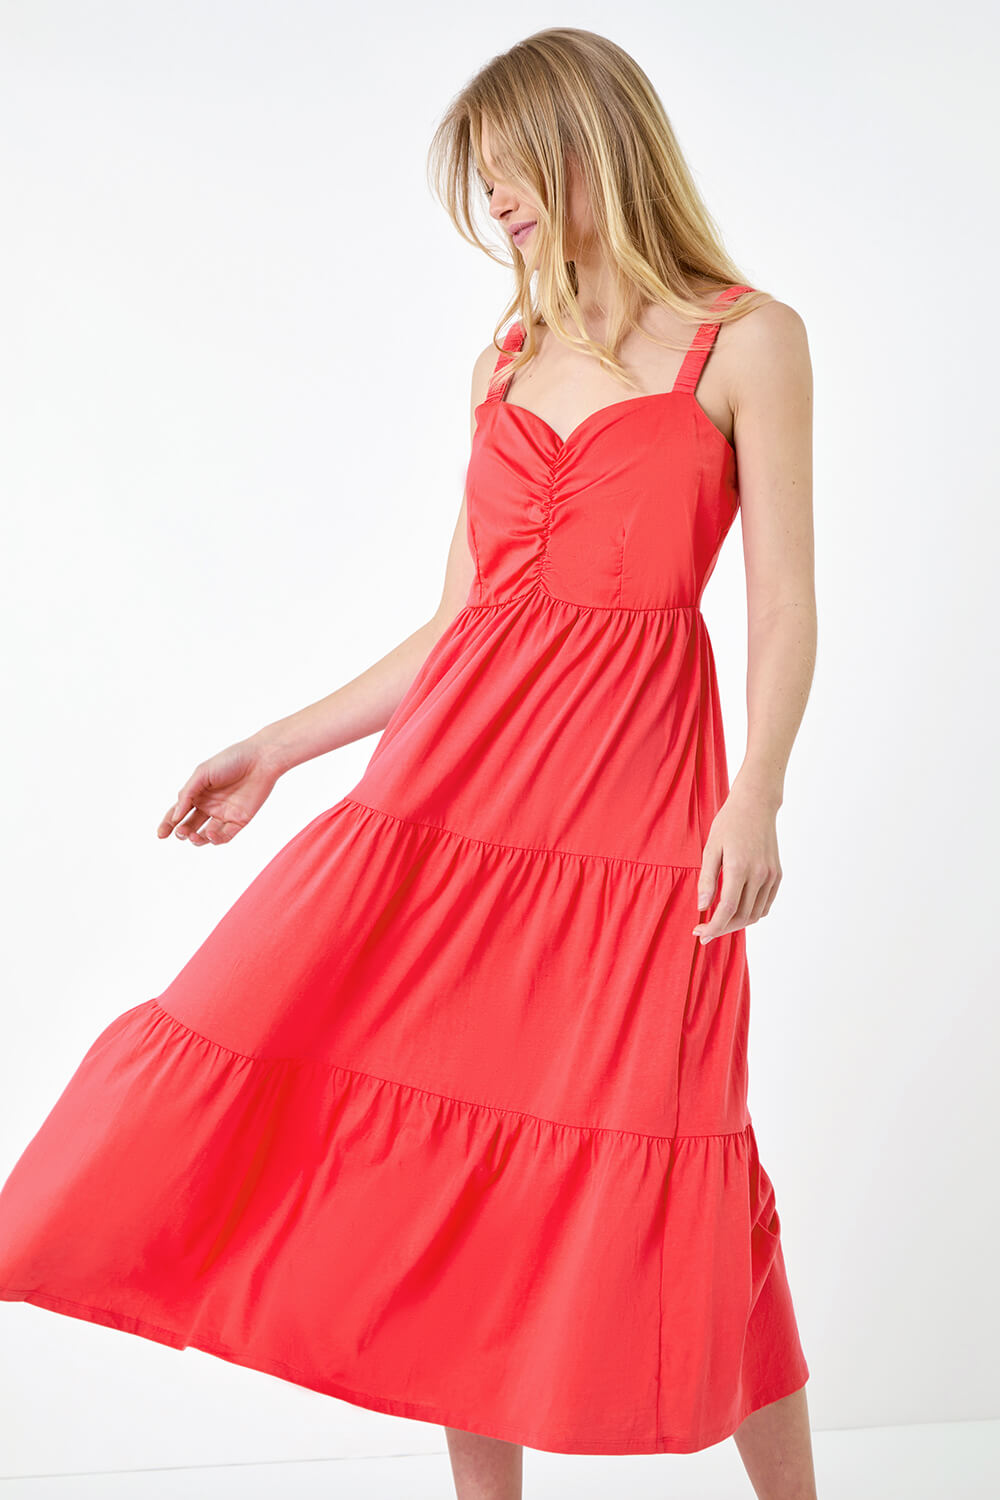 CORAL Cotton Strappy Tiered Midi Dress, Image 4 of 7